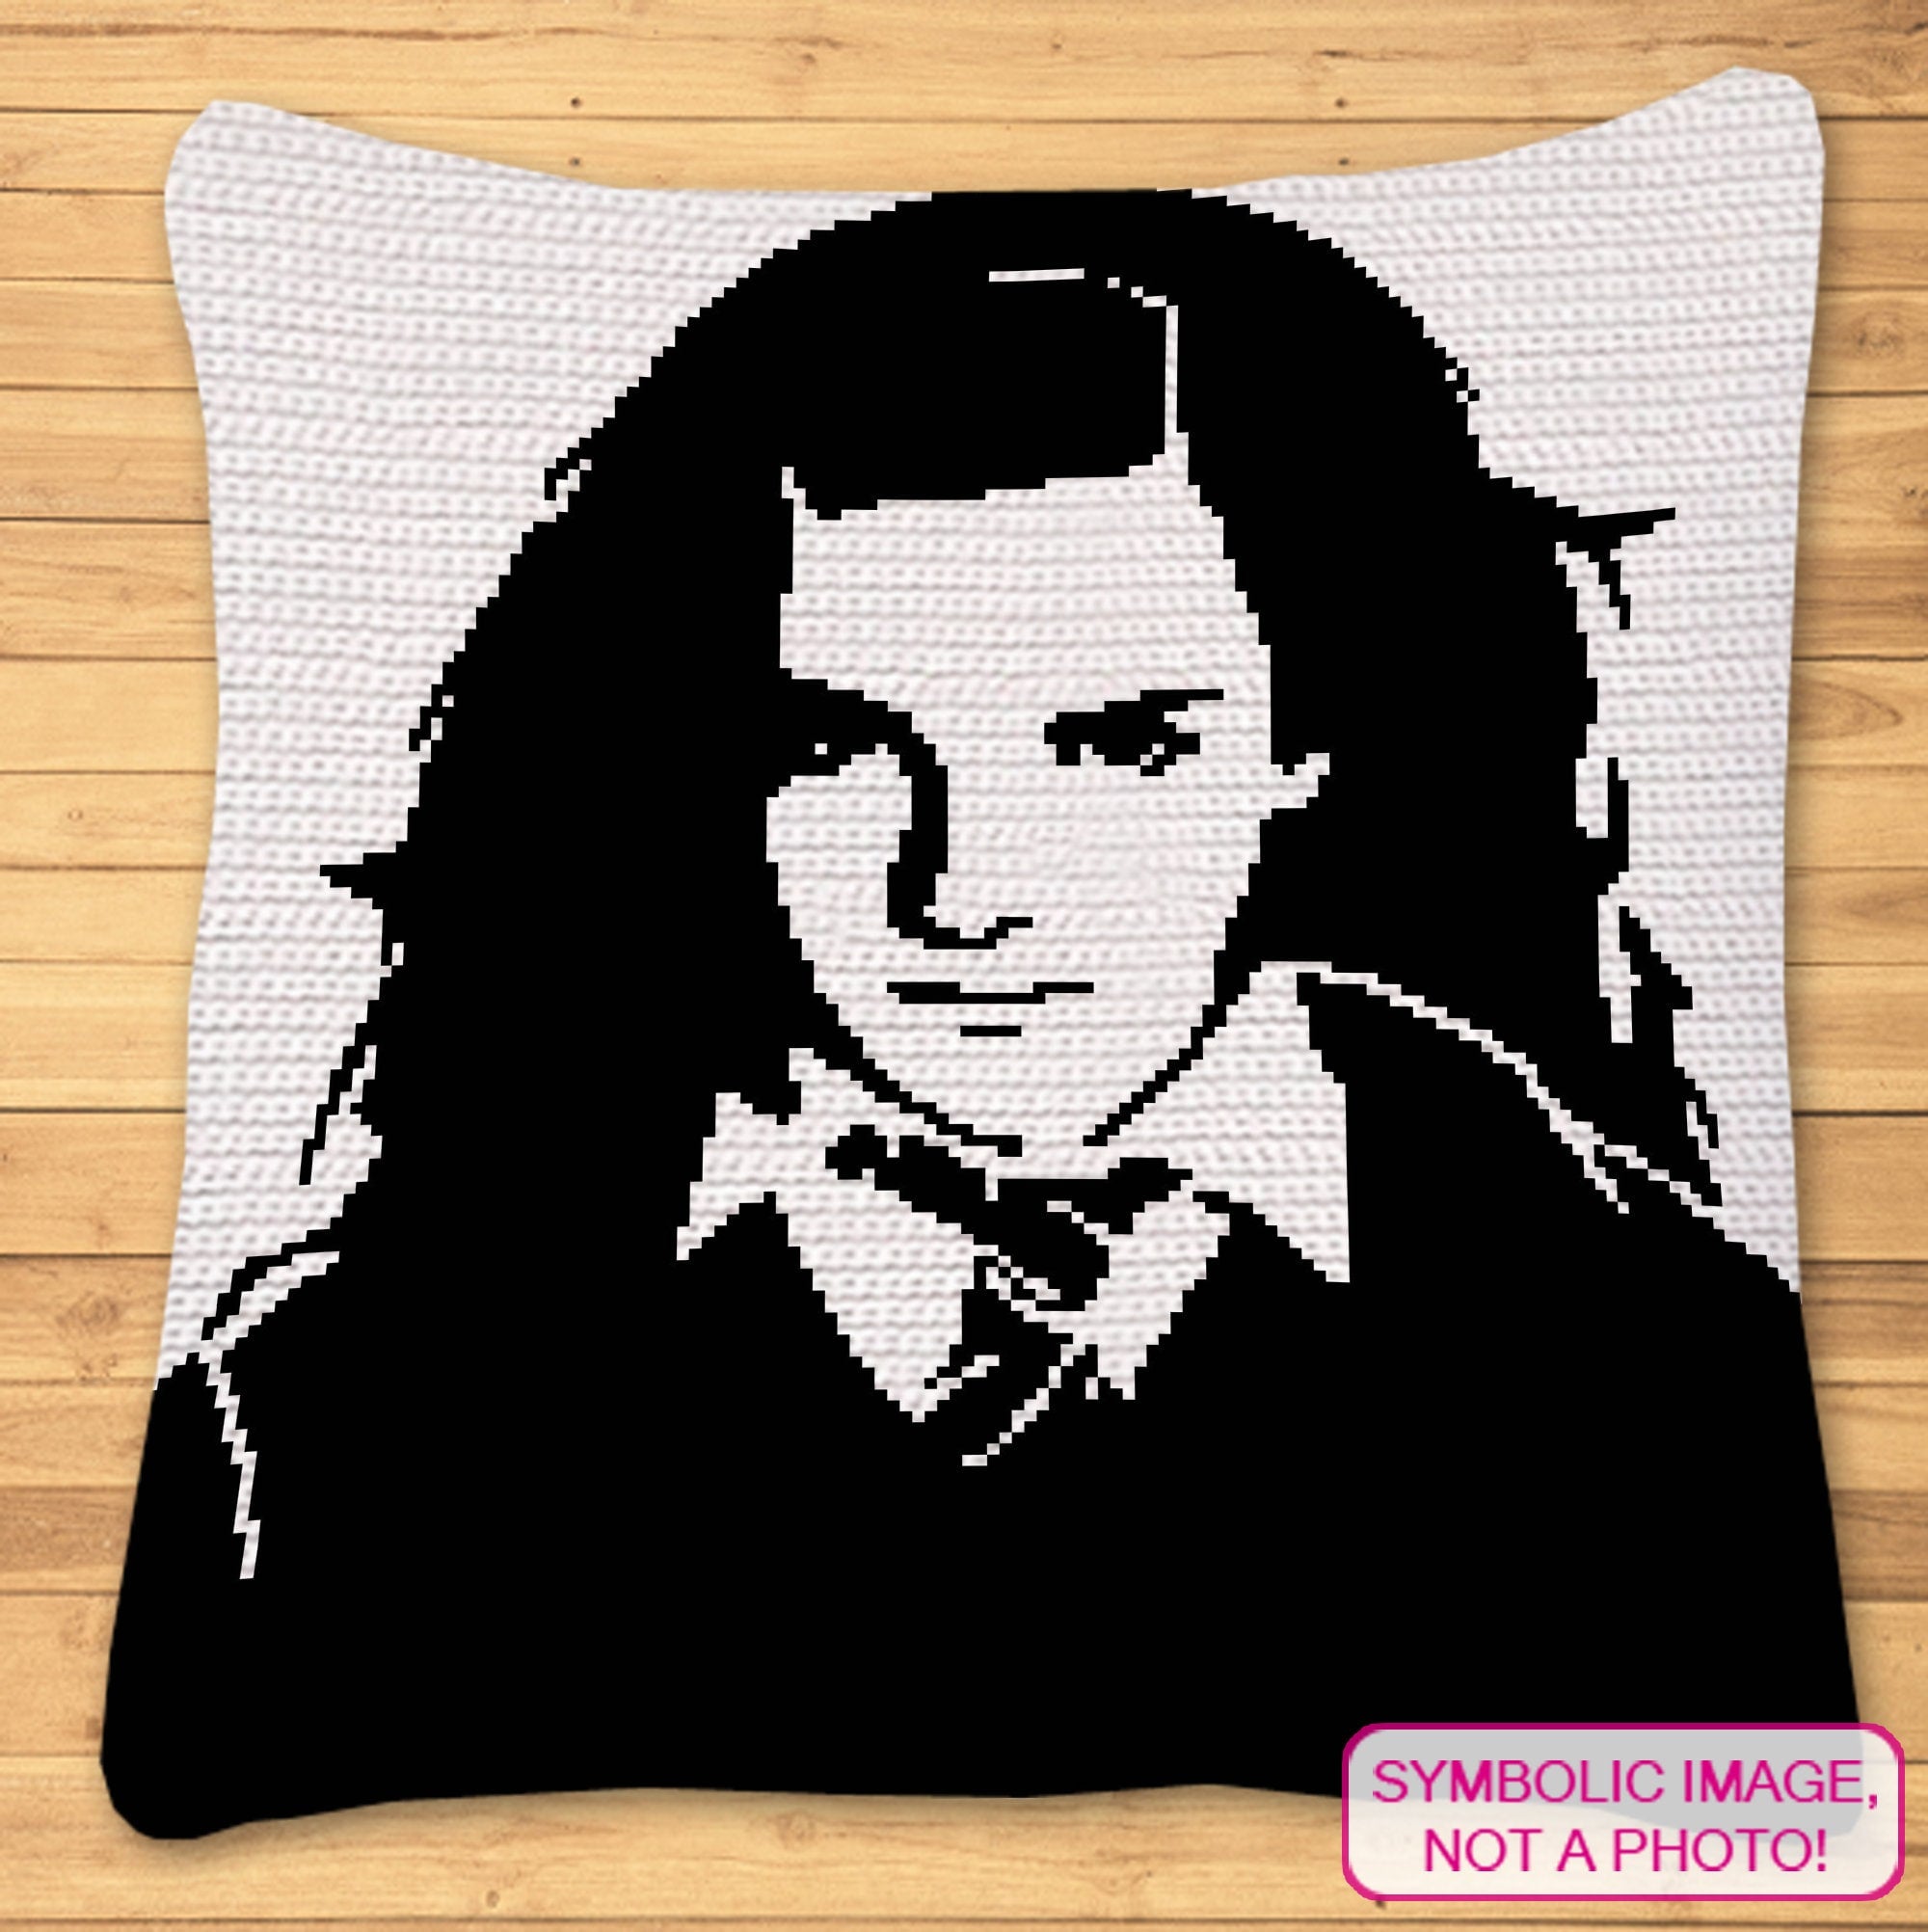 Harry Potter Patterns - Crochet Celebrity Emma Watson a Graph Pattern with Written Instructions for a Tapestry Crochet Blanket and Pillow Pattern; PDF Digital Files. Click to learn more!